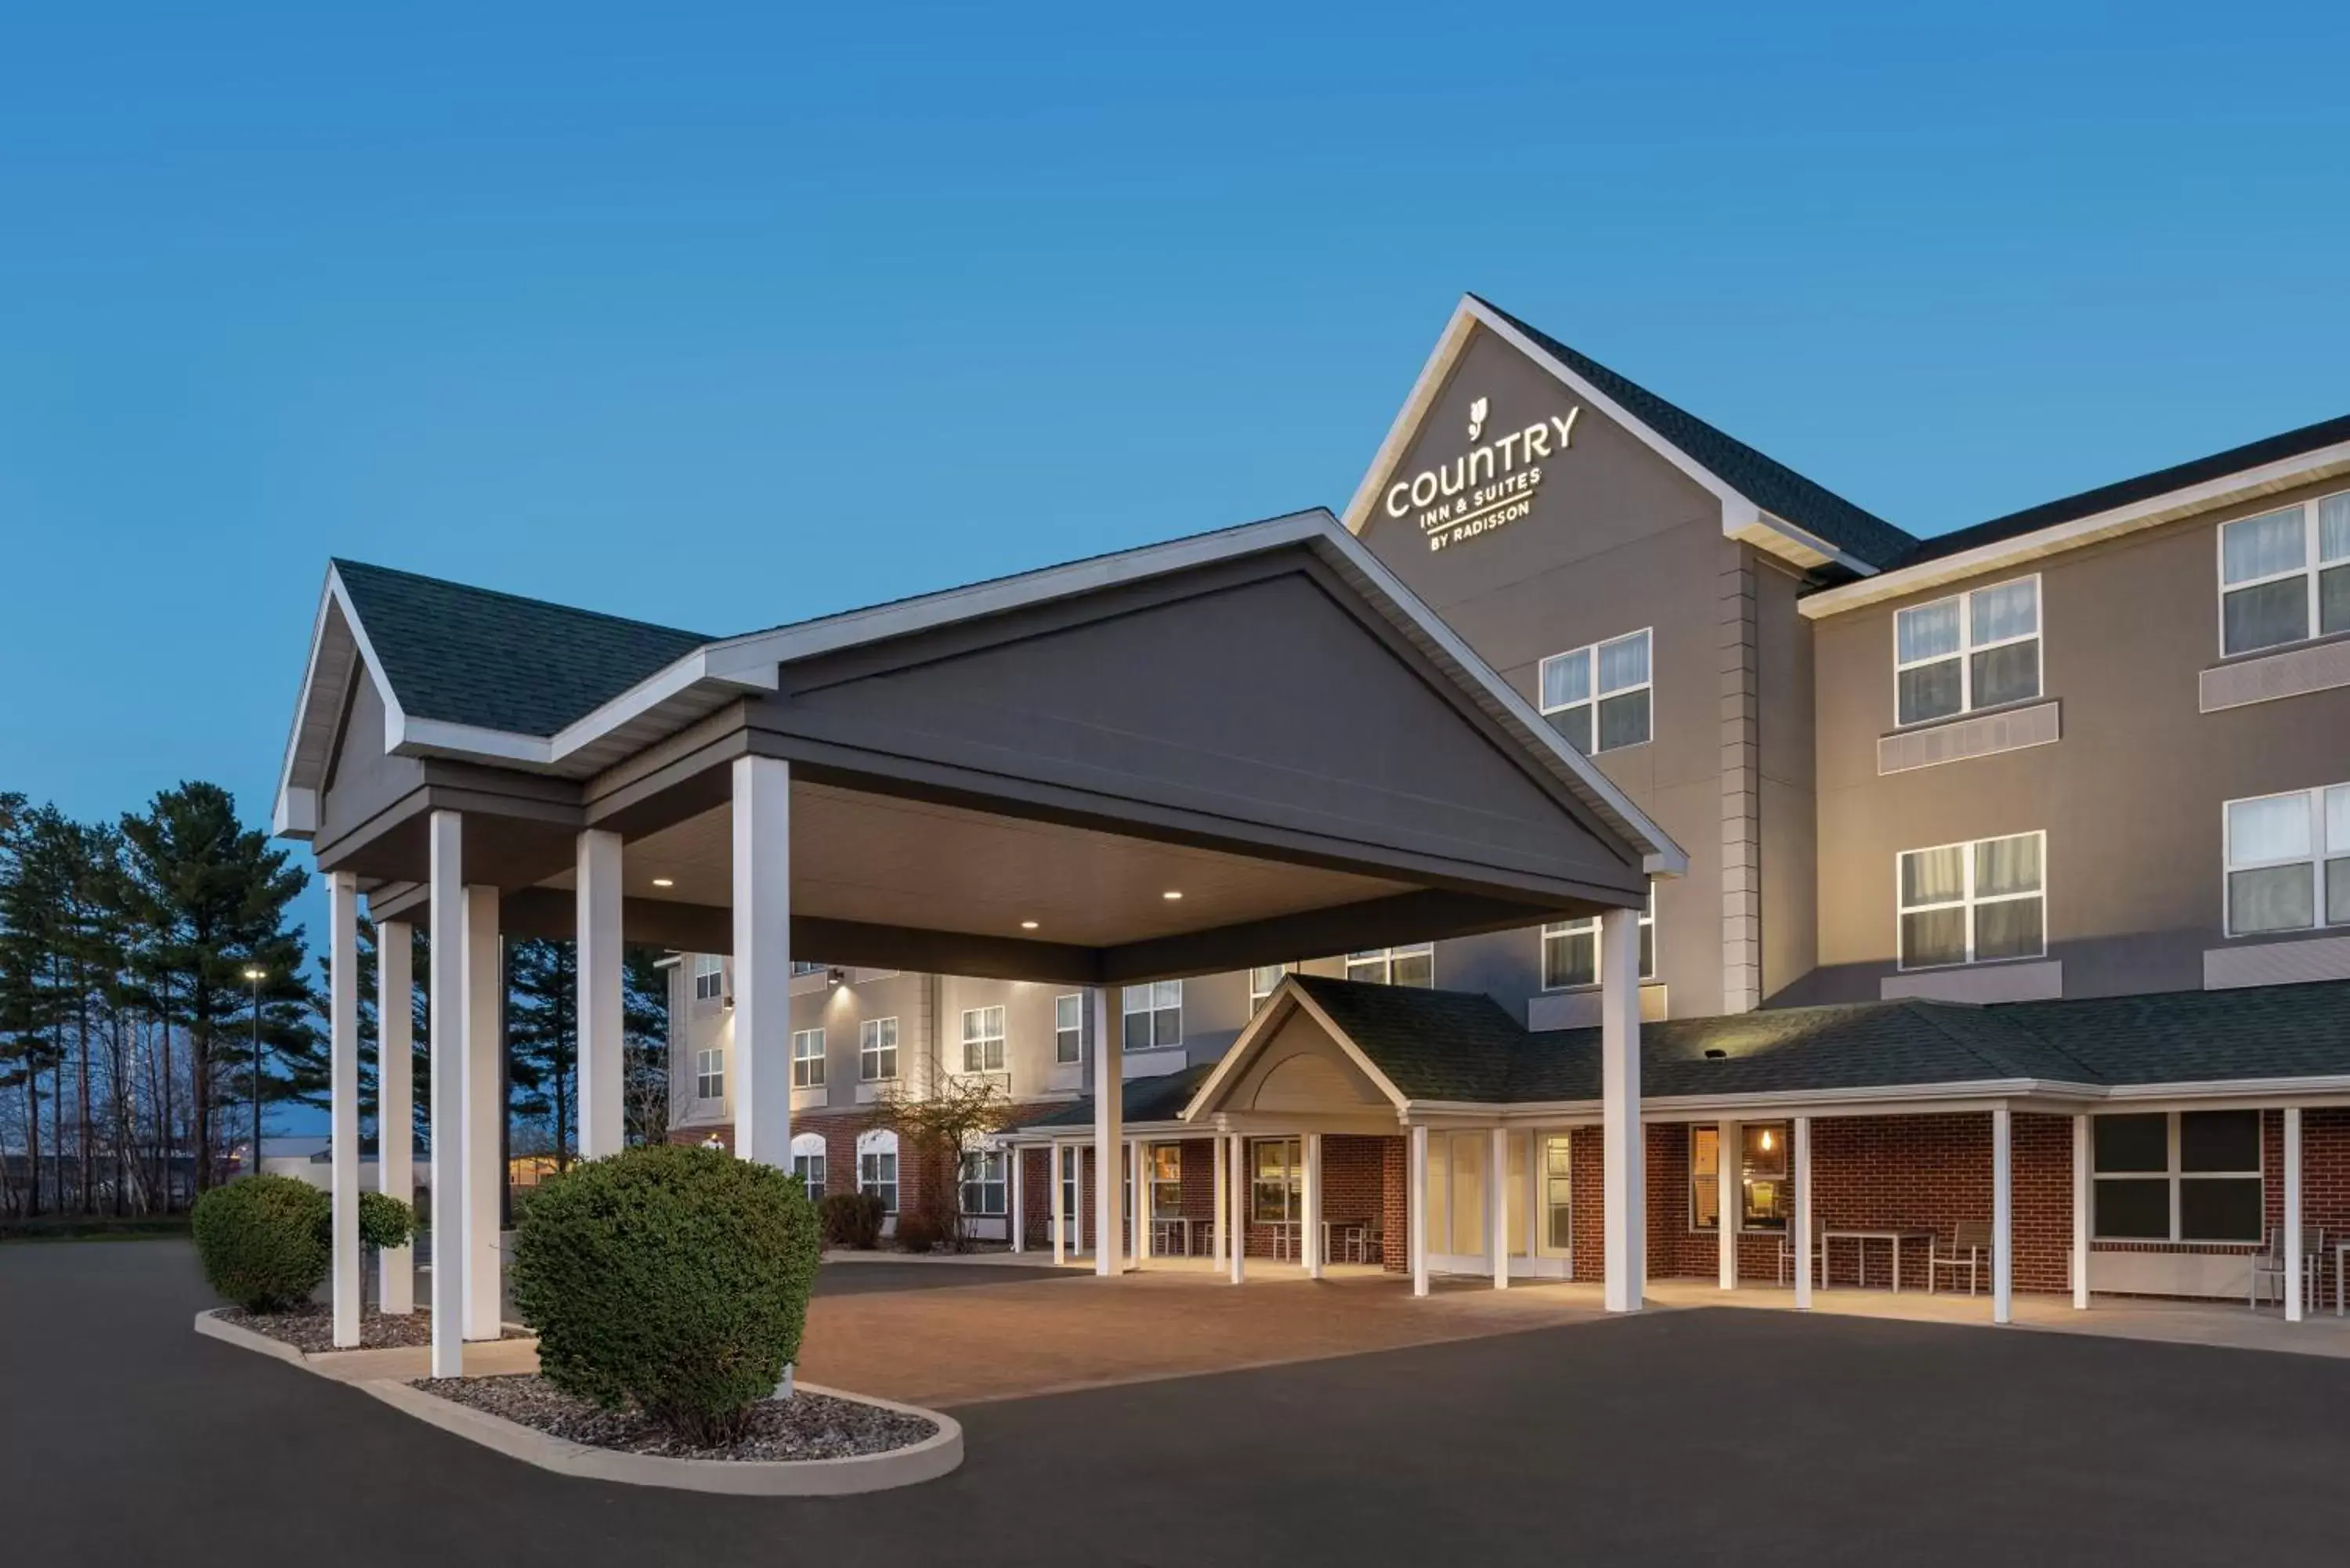 Property Building in Country Inn & Suites by Radisson, Marinette, WI